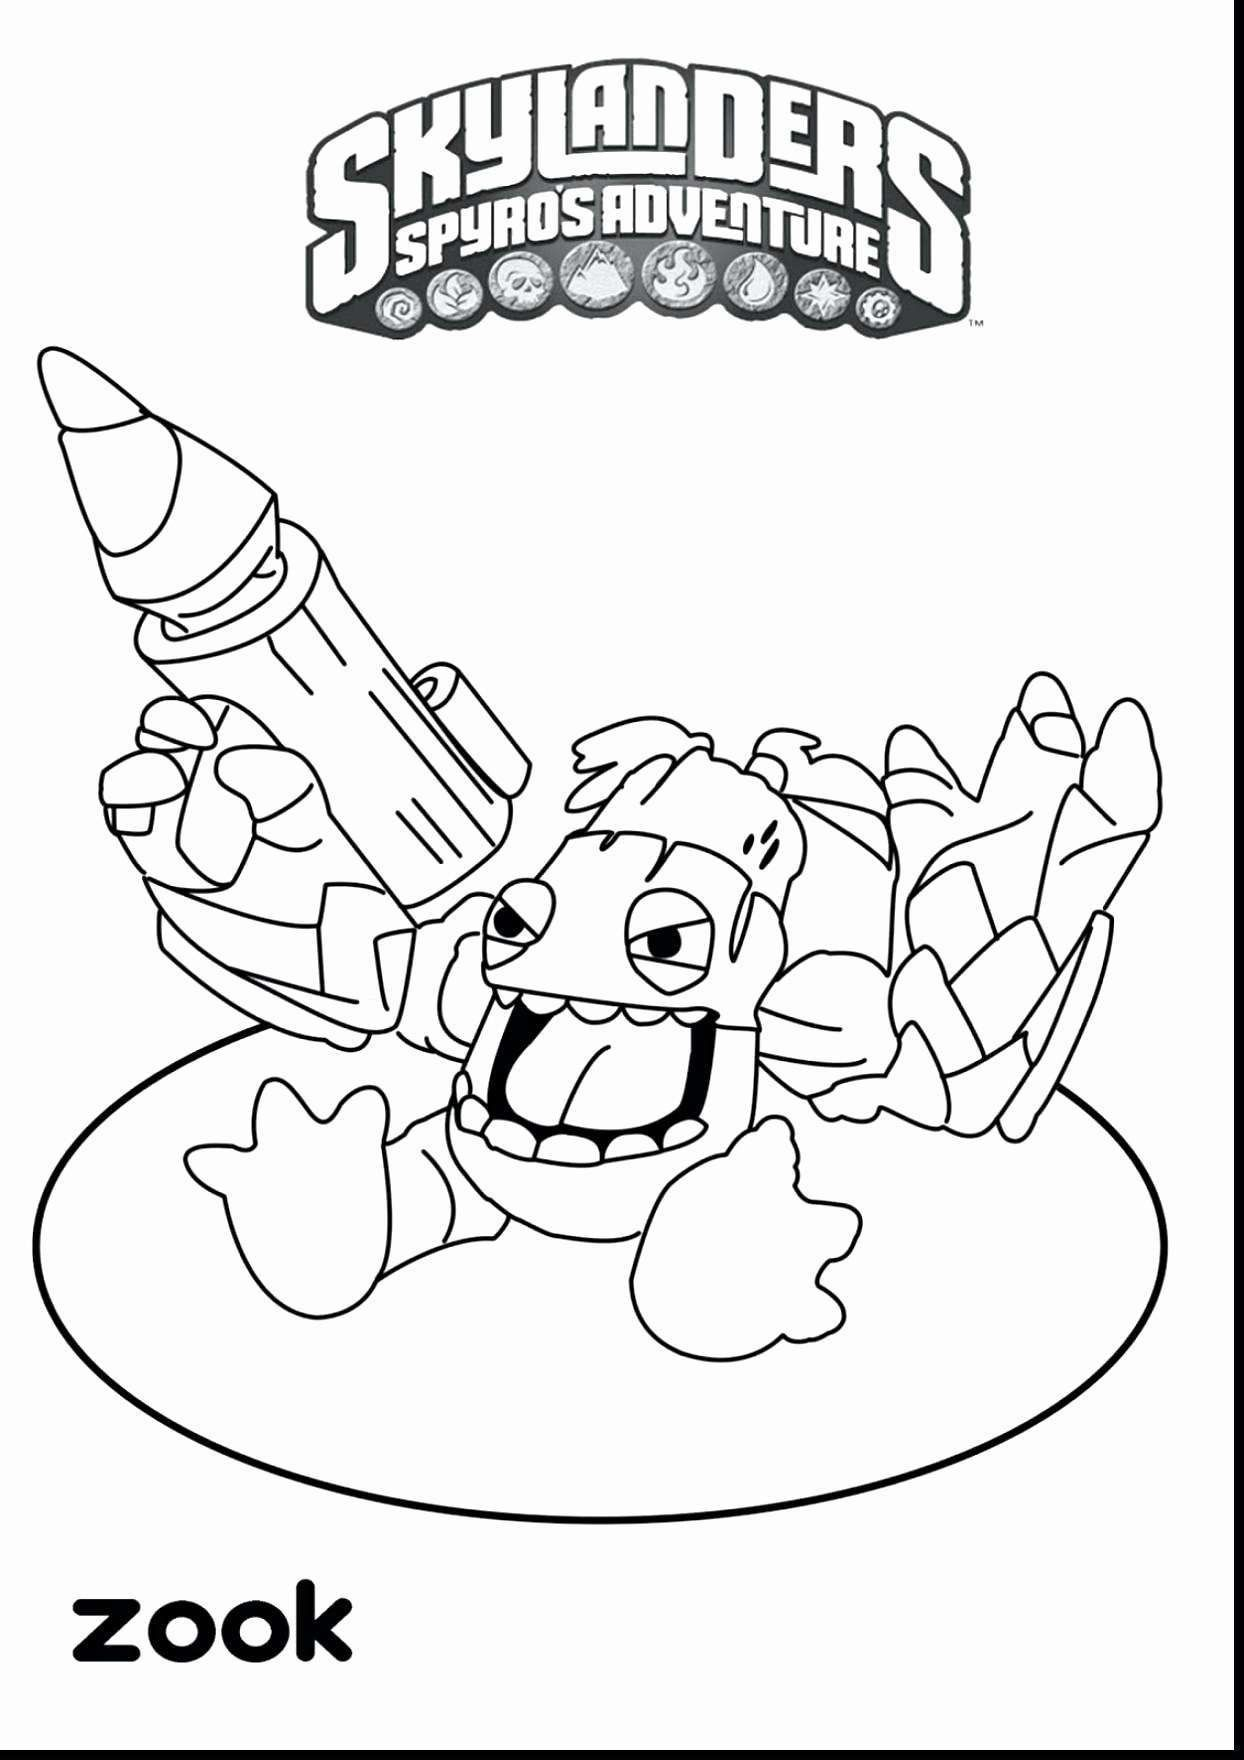 Coloring Pages For Girls Frozen Inspirational Frozen Halloween Coloring Pages Jvzooreview